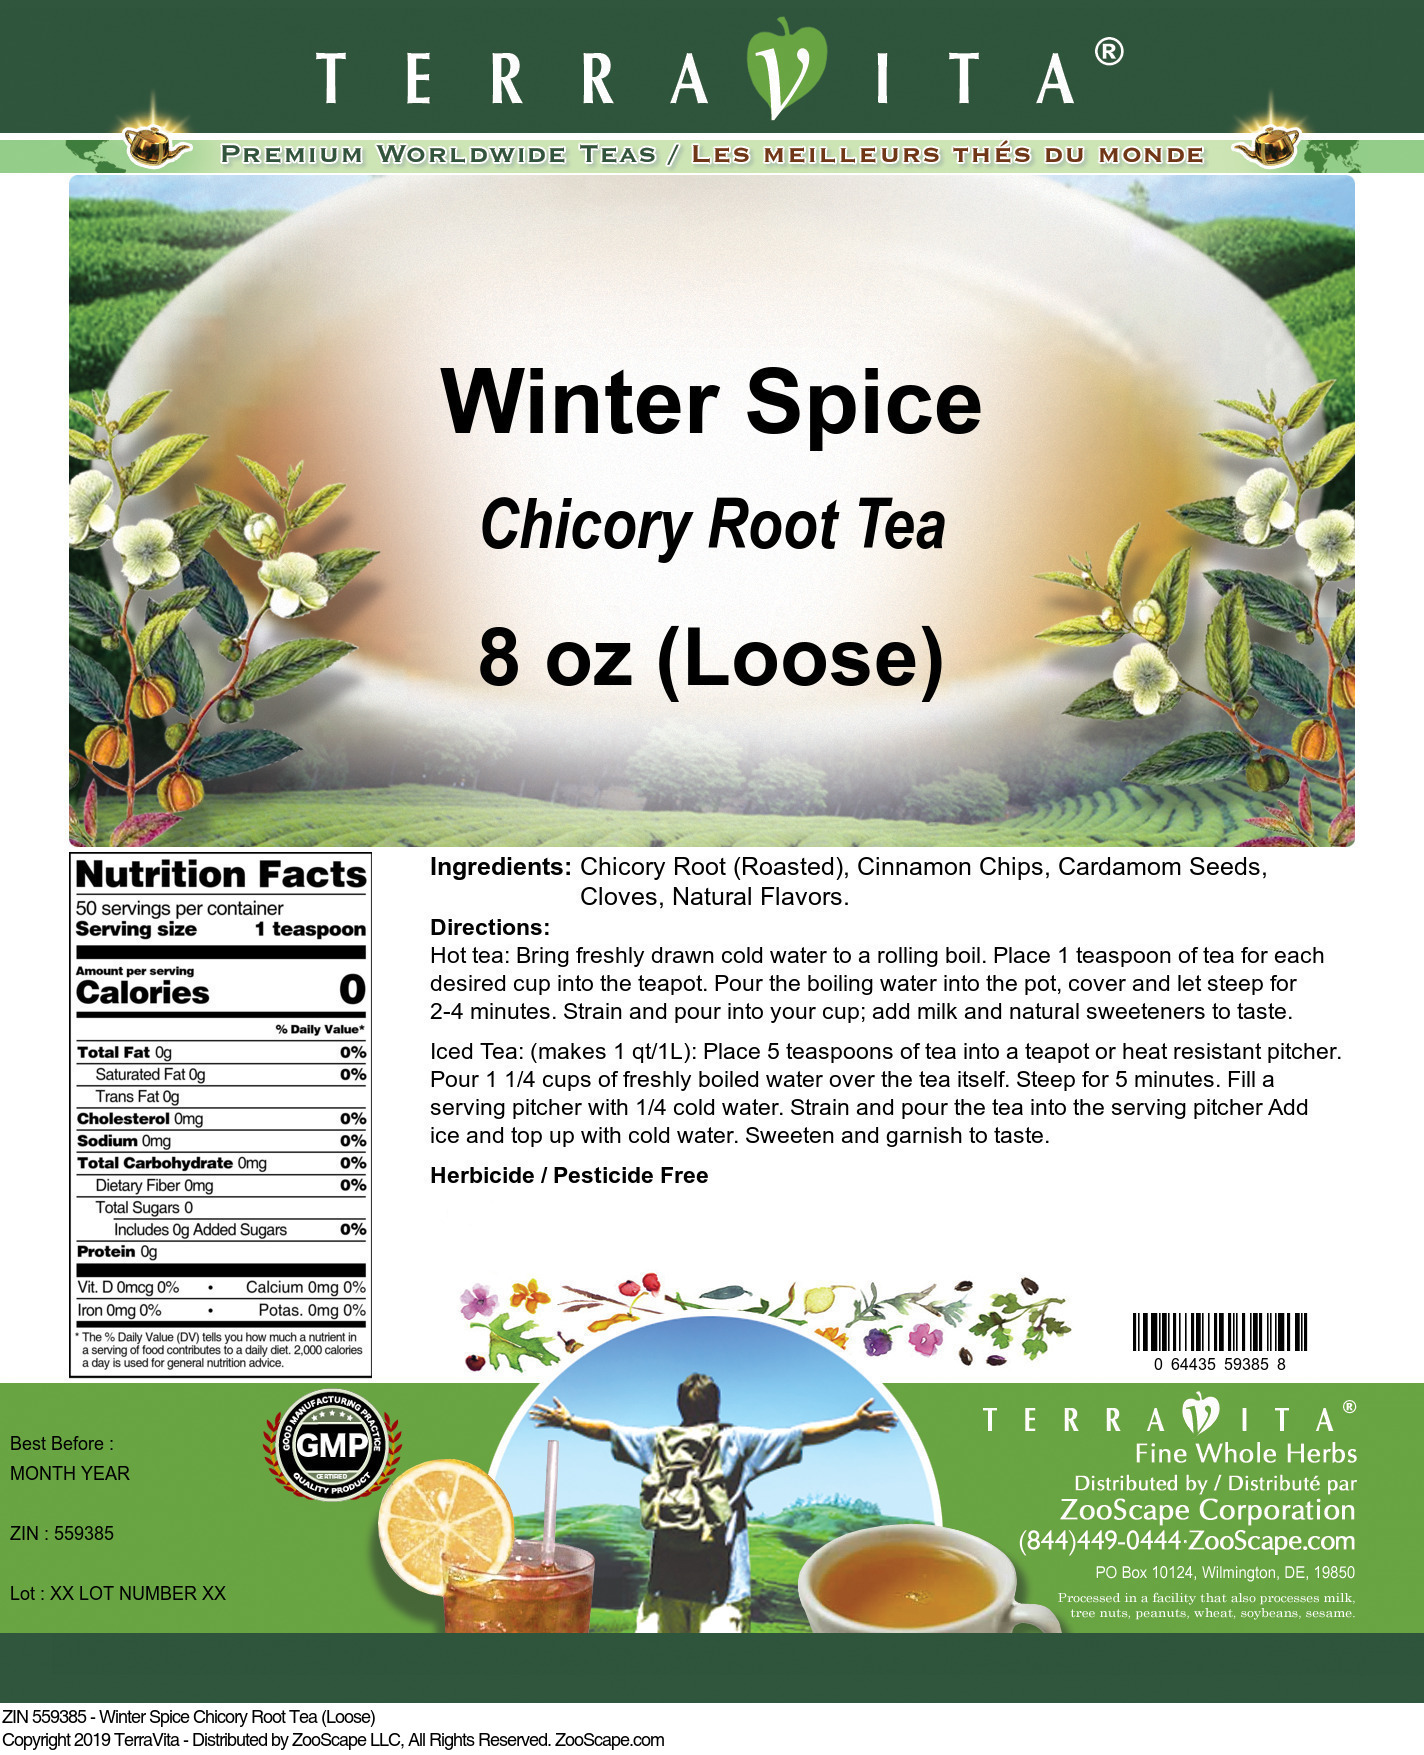 Winter Spice Chicory Root Tea (Loose) - Label